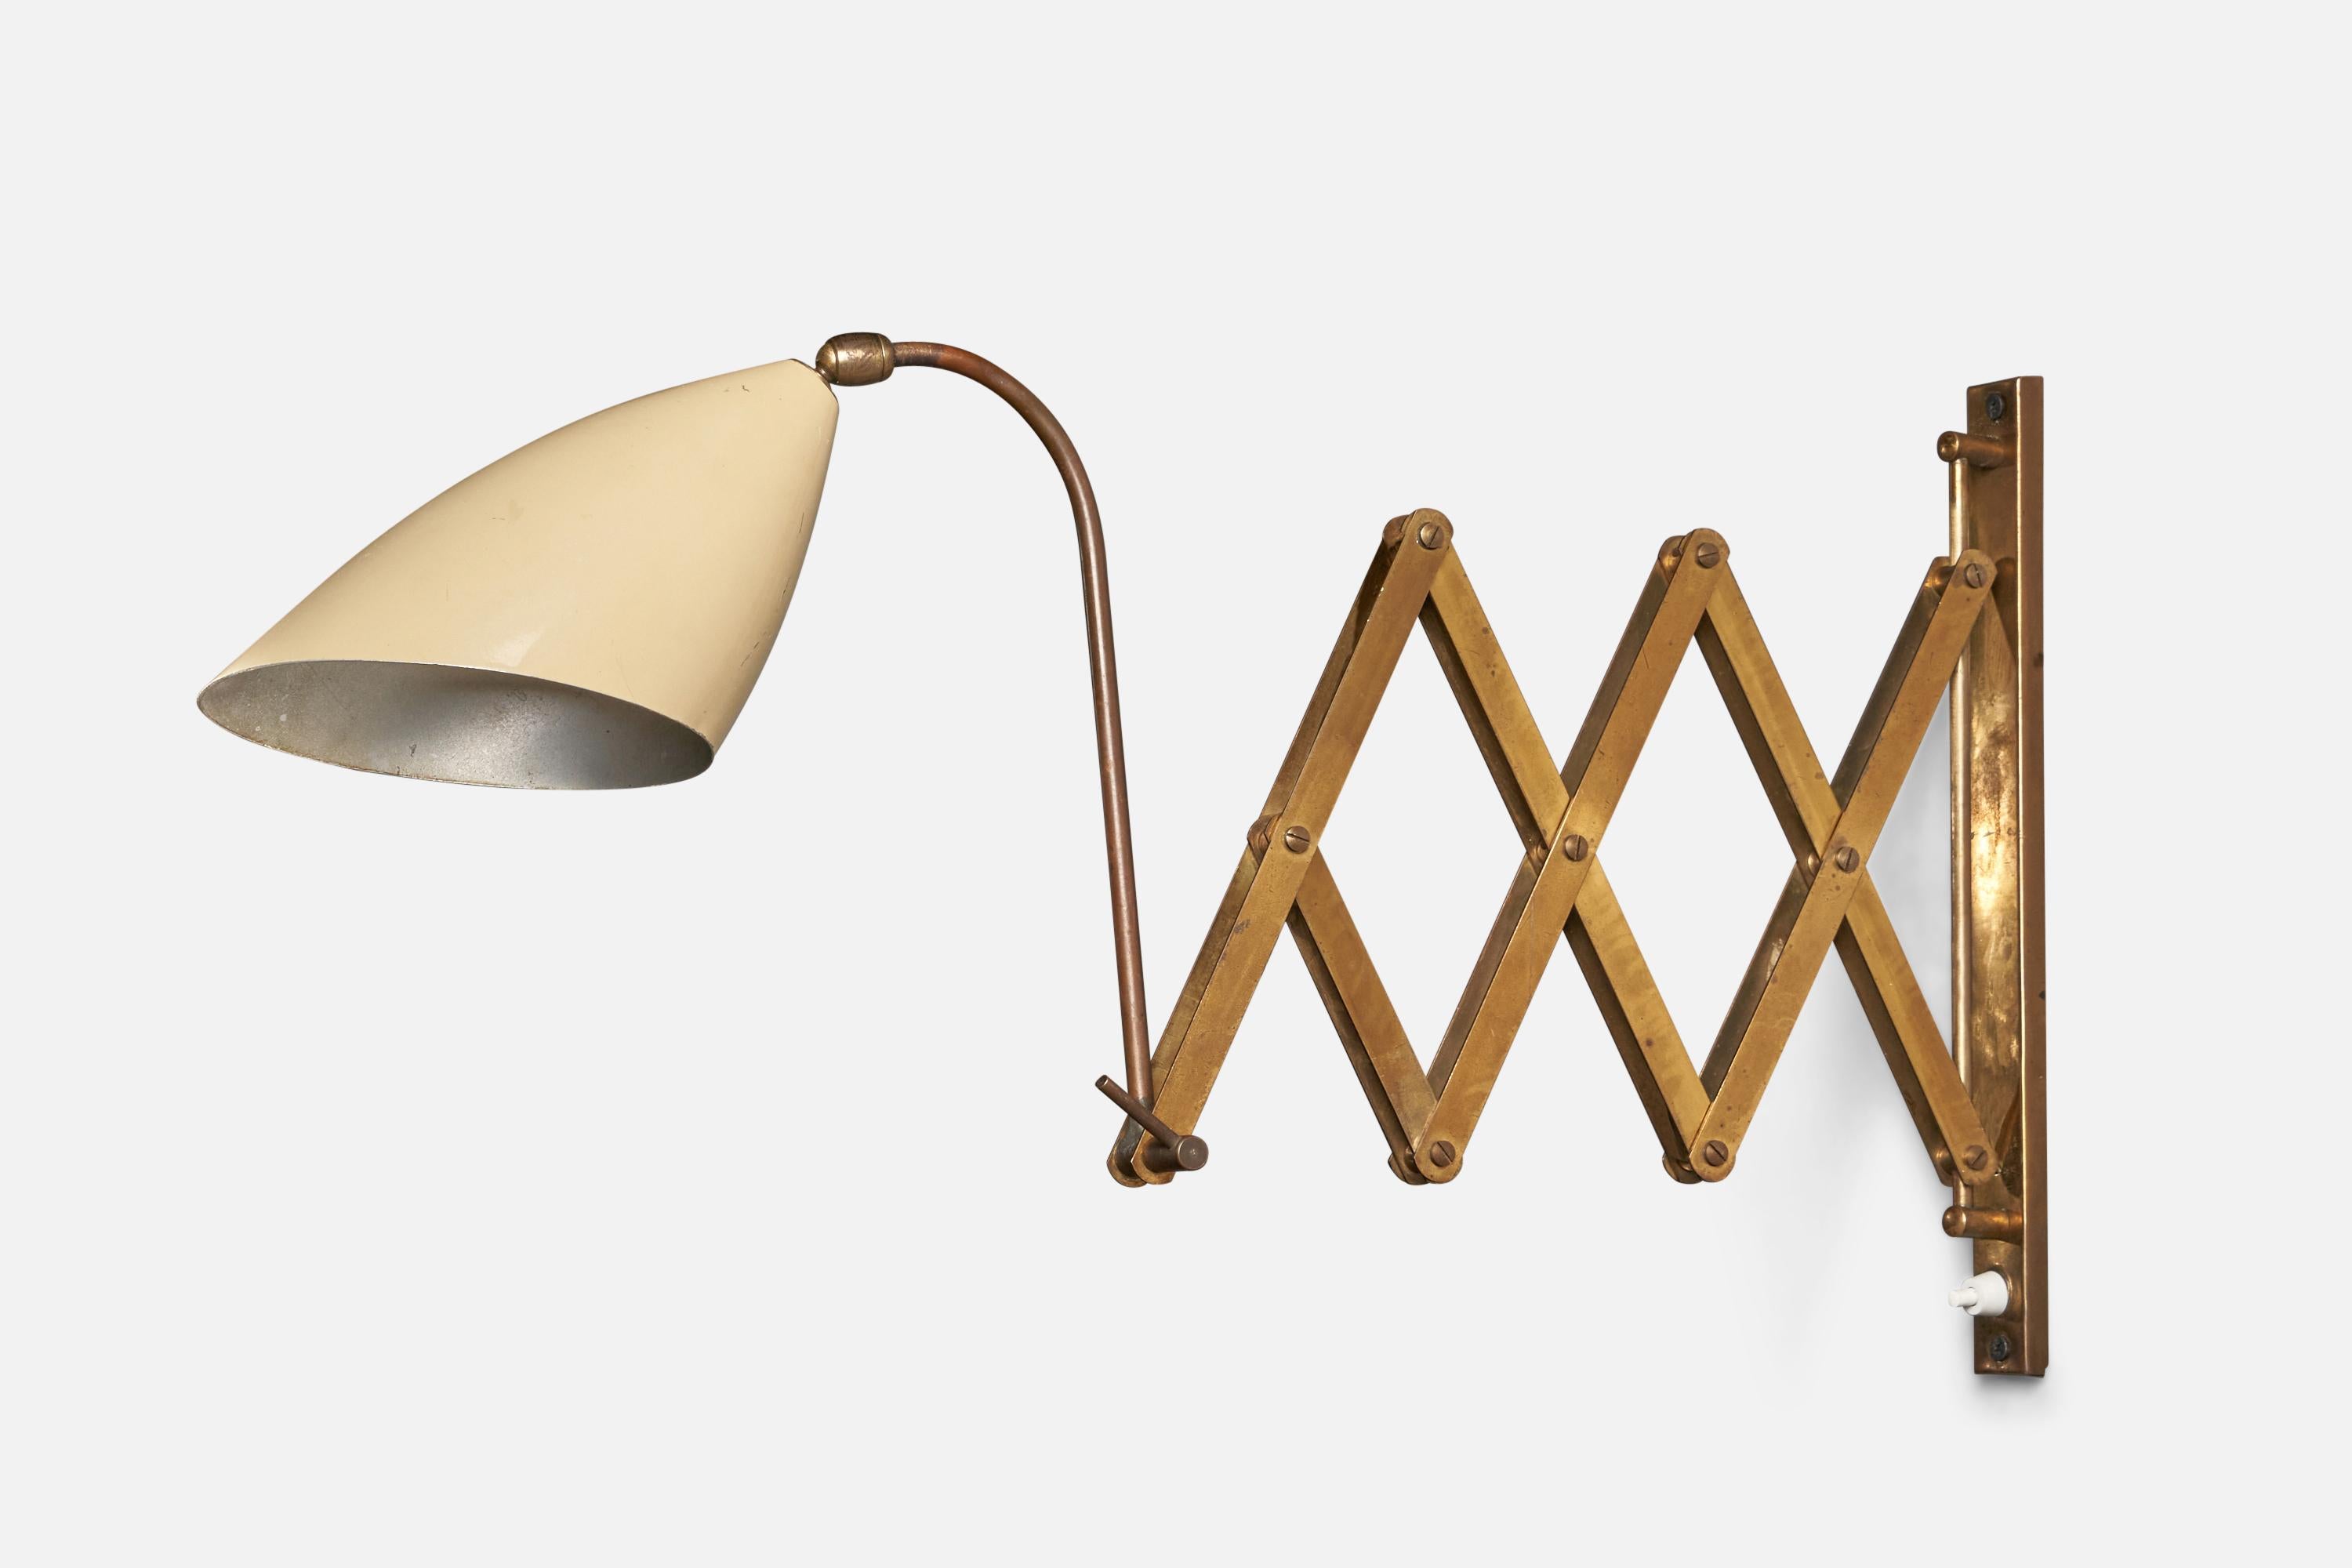 An adjustable brass and white-lacquered metal wall light designed and produced in Italy, 1950s.

Overall Dimensions: 13.25